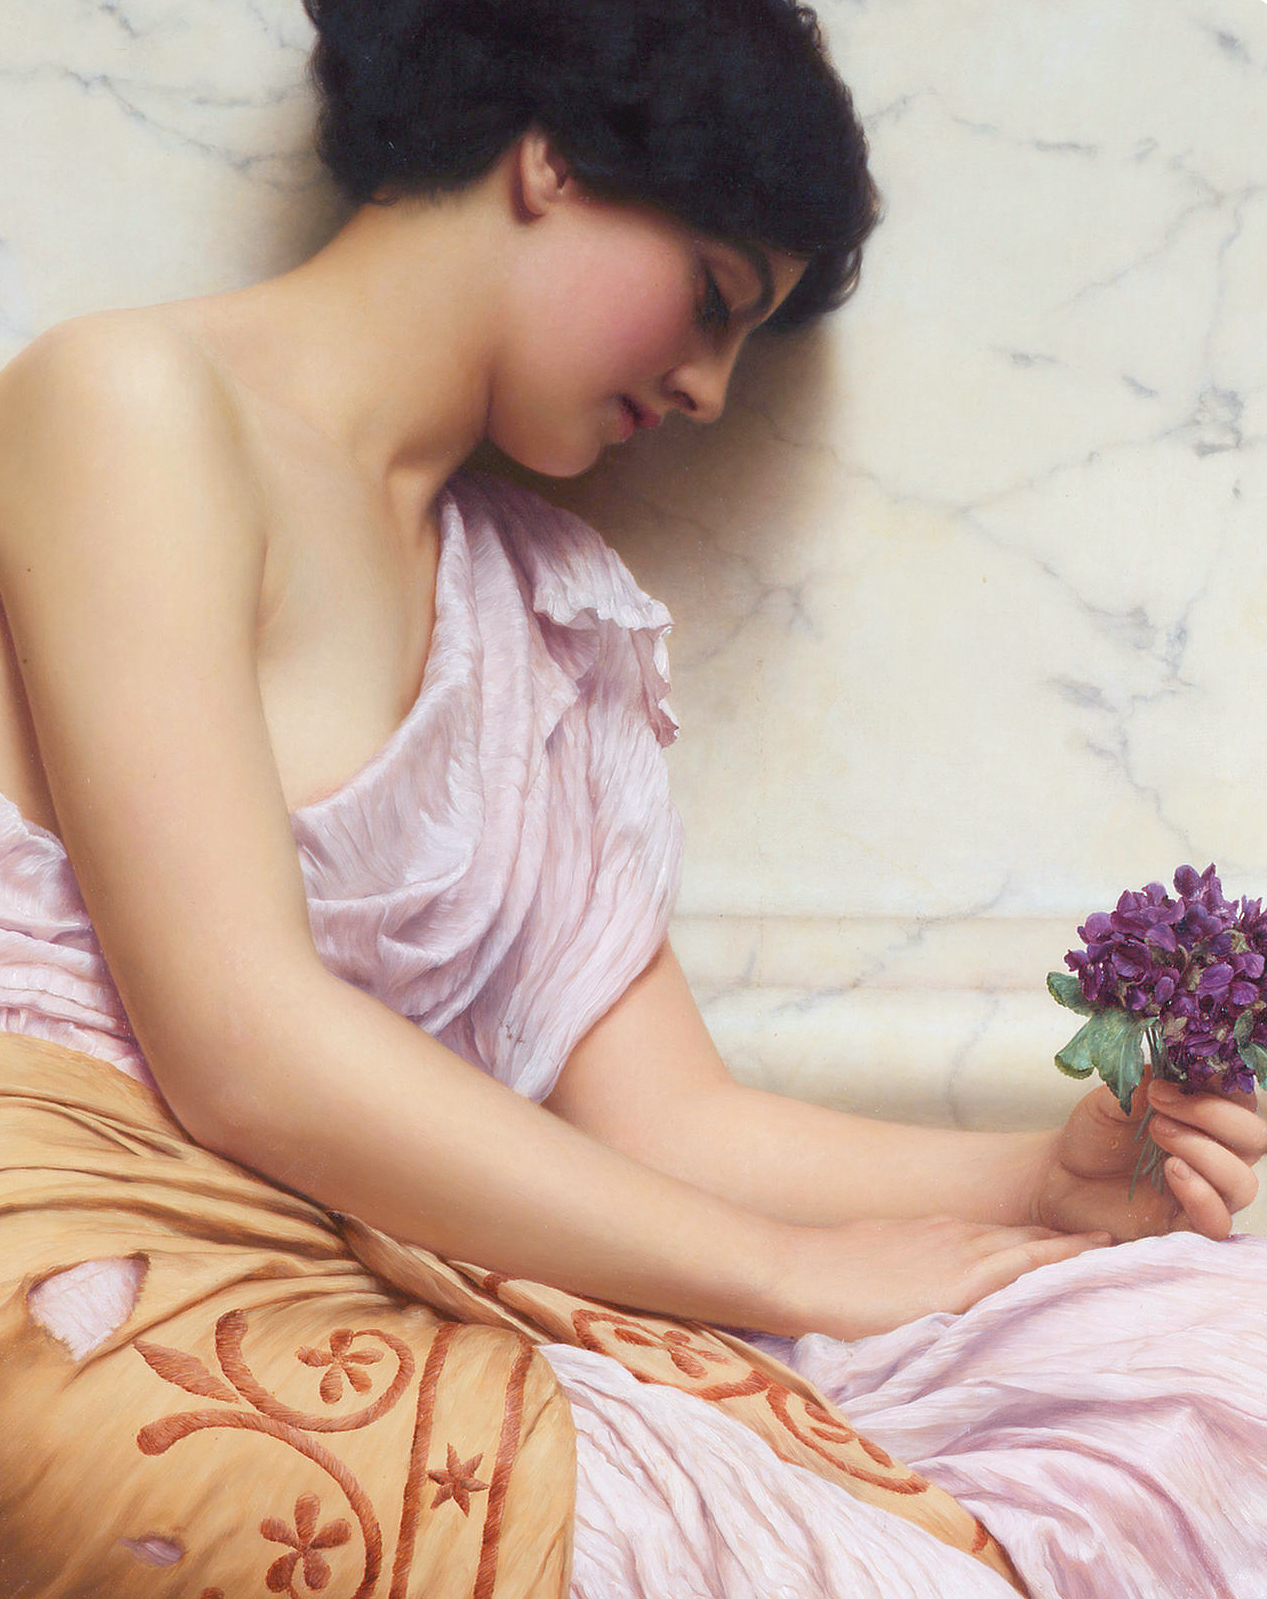 "Violets, Sweet Violets" by John William Godward, 1906, Private Collection (sold by Bonhams). 